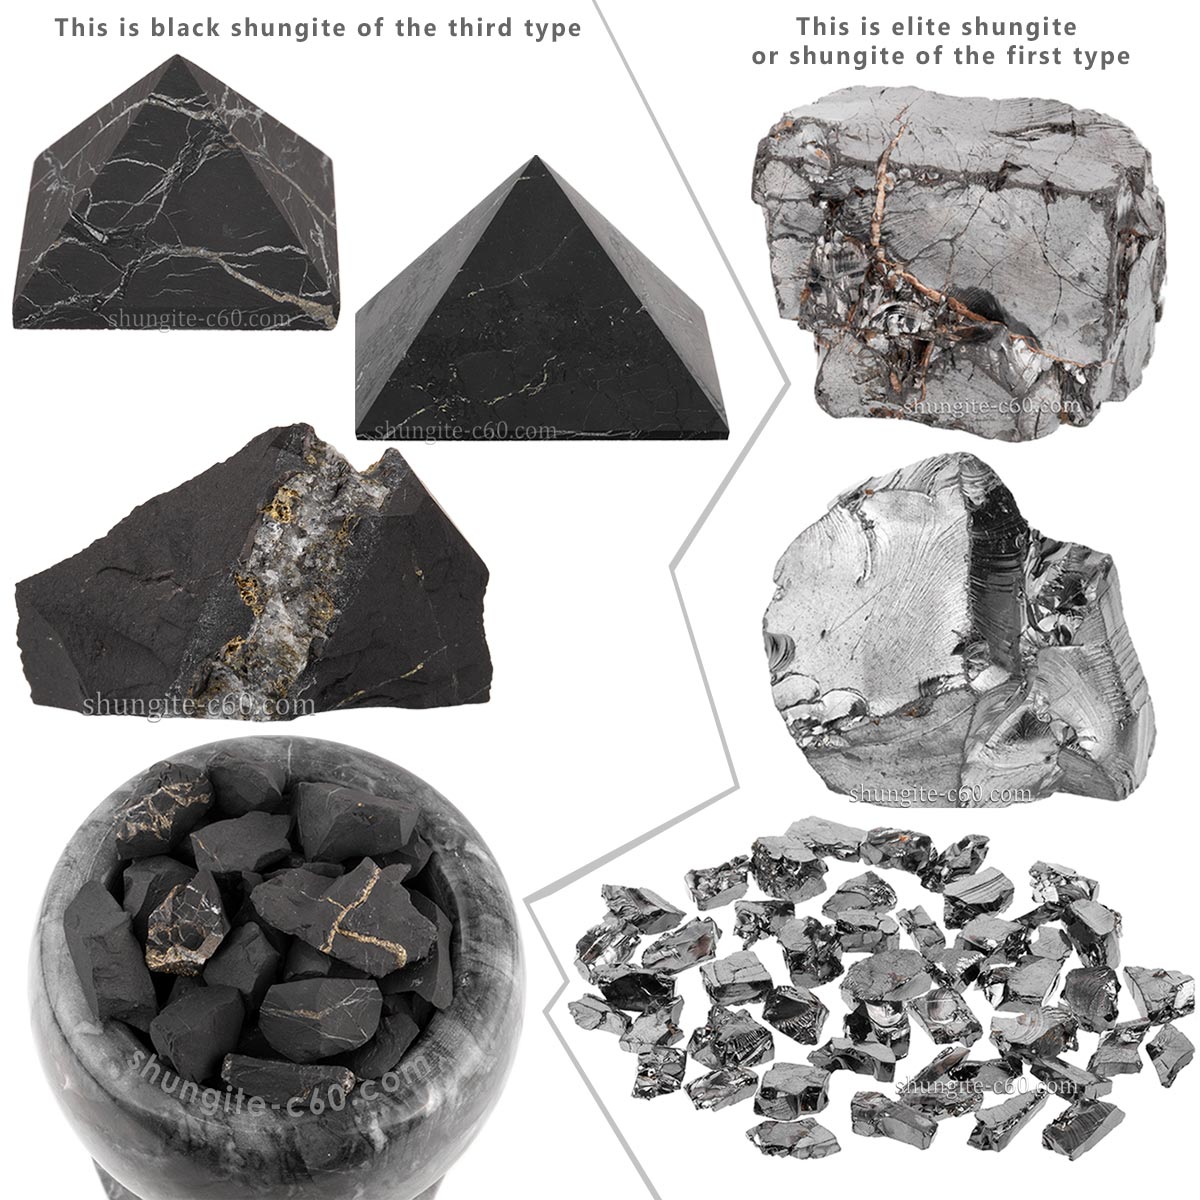 The difference between elite shungite and classic